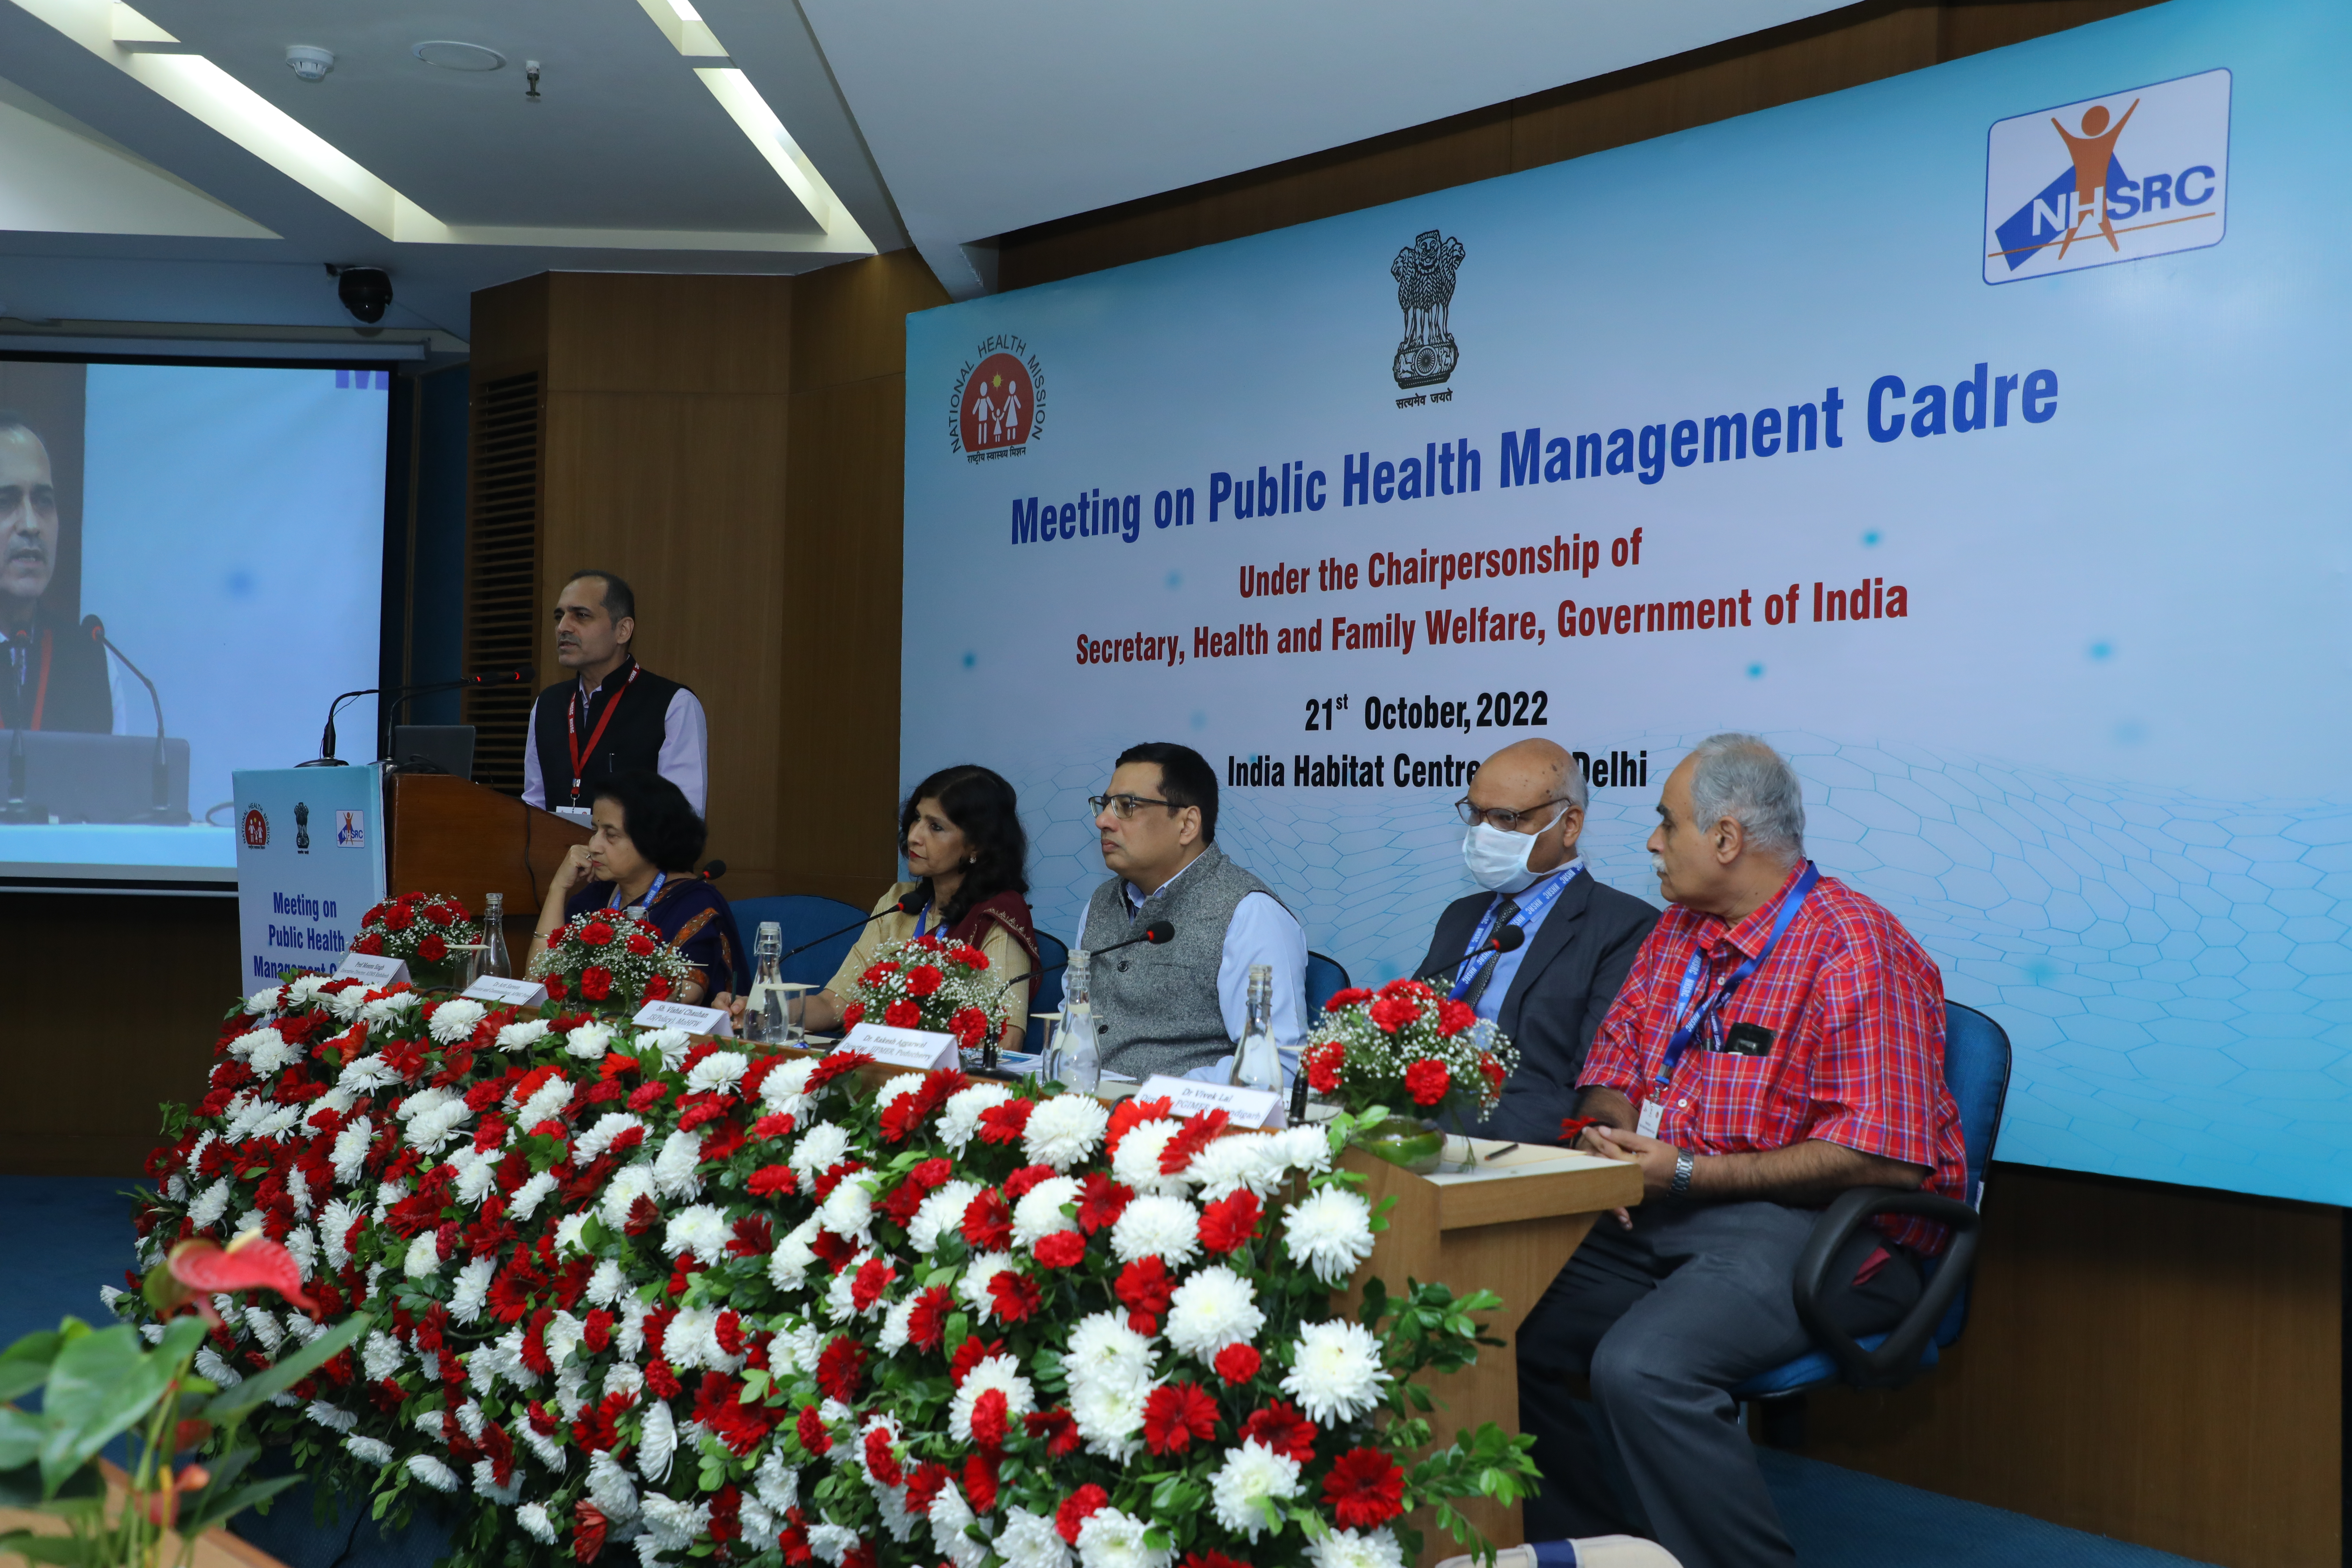 Meeting on Public Health Management Cadre